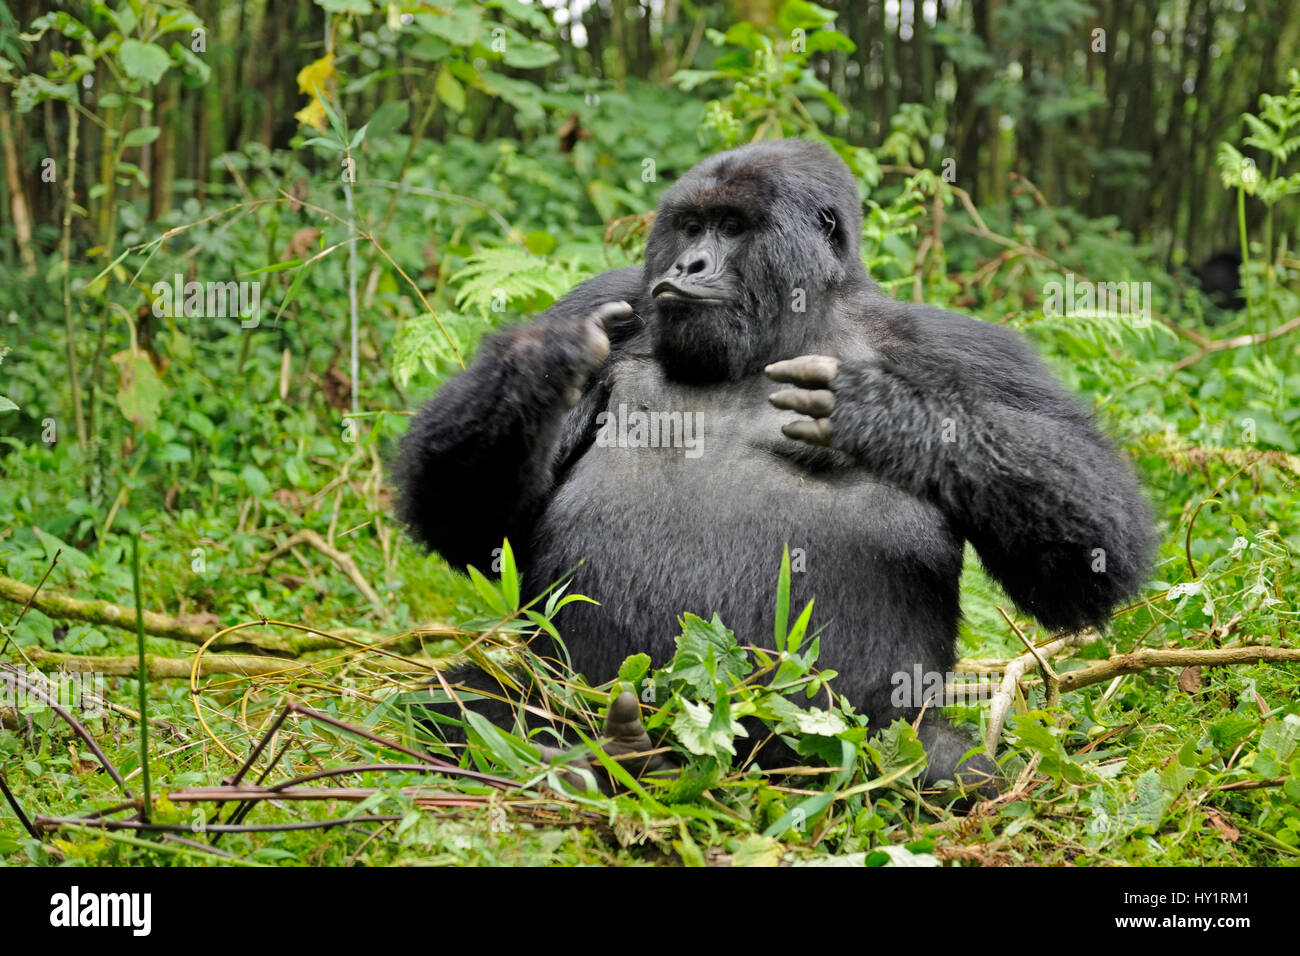 Mountain gorilla (Gorilla beringei beringei) silverback male playing in habitat, drunk on bamboo shoots, Volcanoes National Park, Virunga mountains, Rwanda. Note - if gorillas eat an excess of bamboo shoots they can become intoxicated. Endangered spec Stock Photo